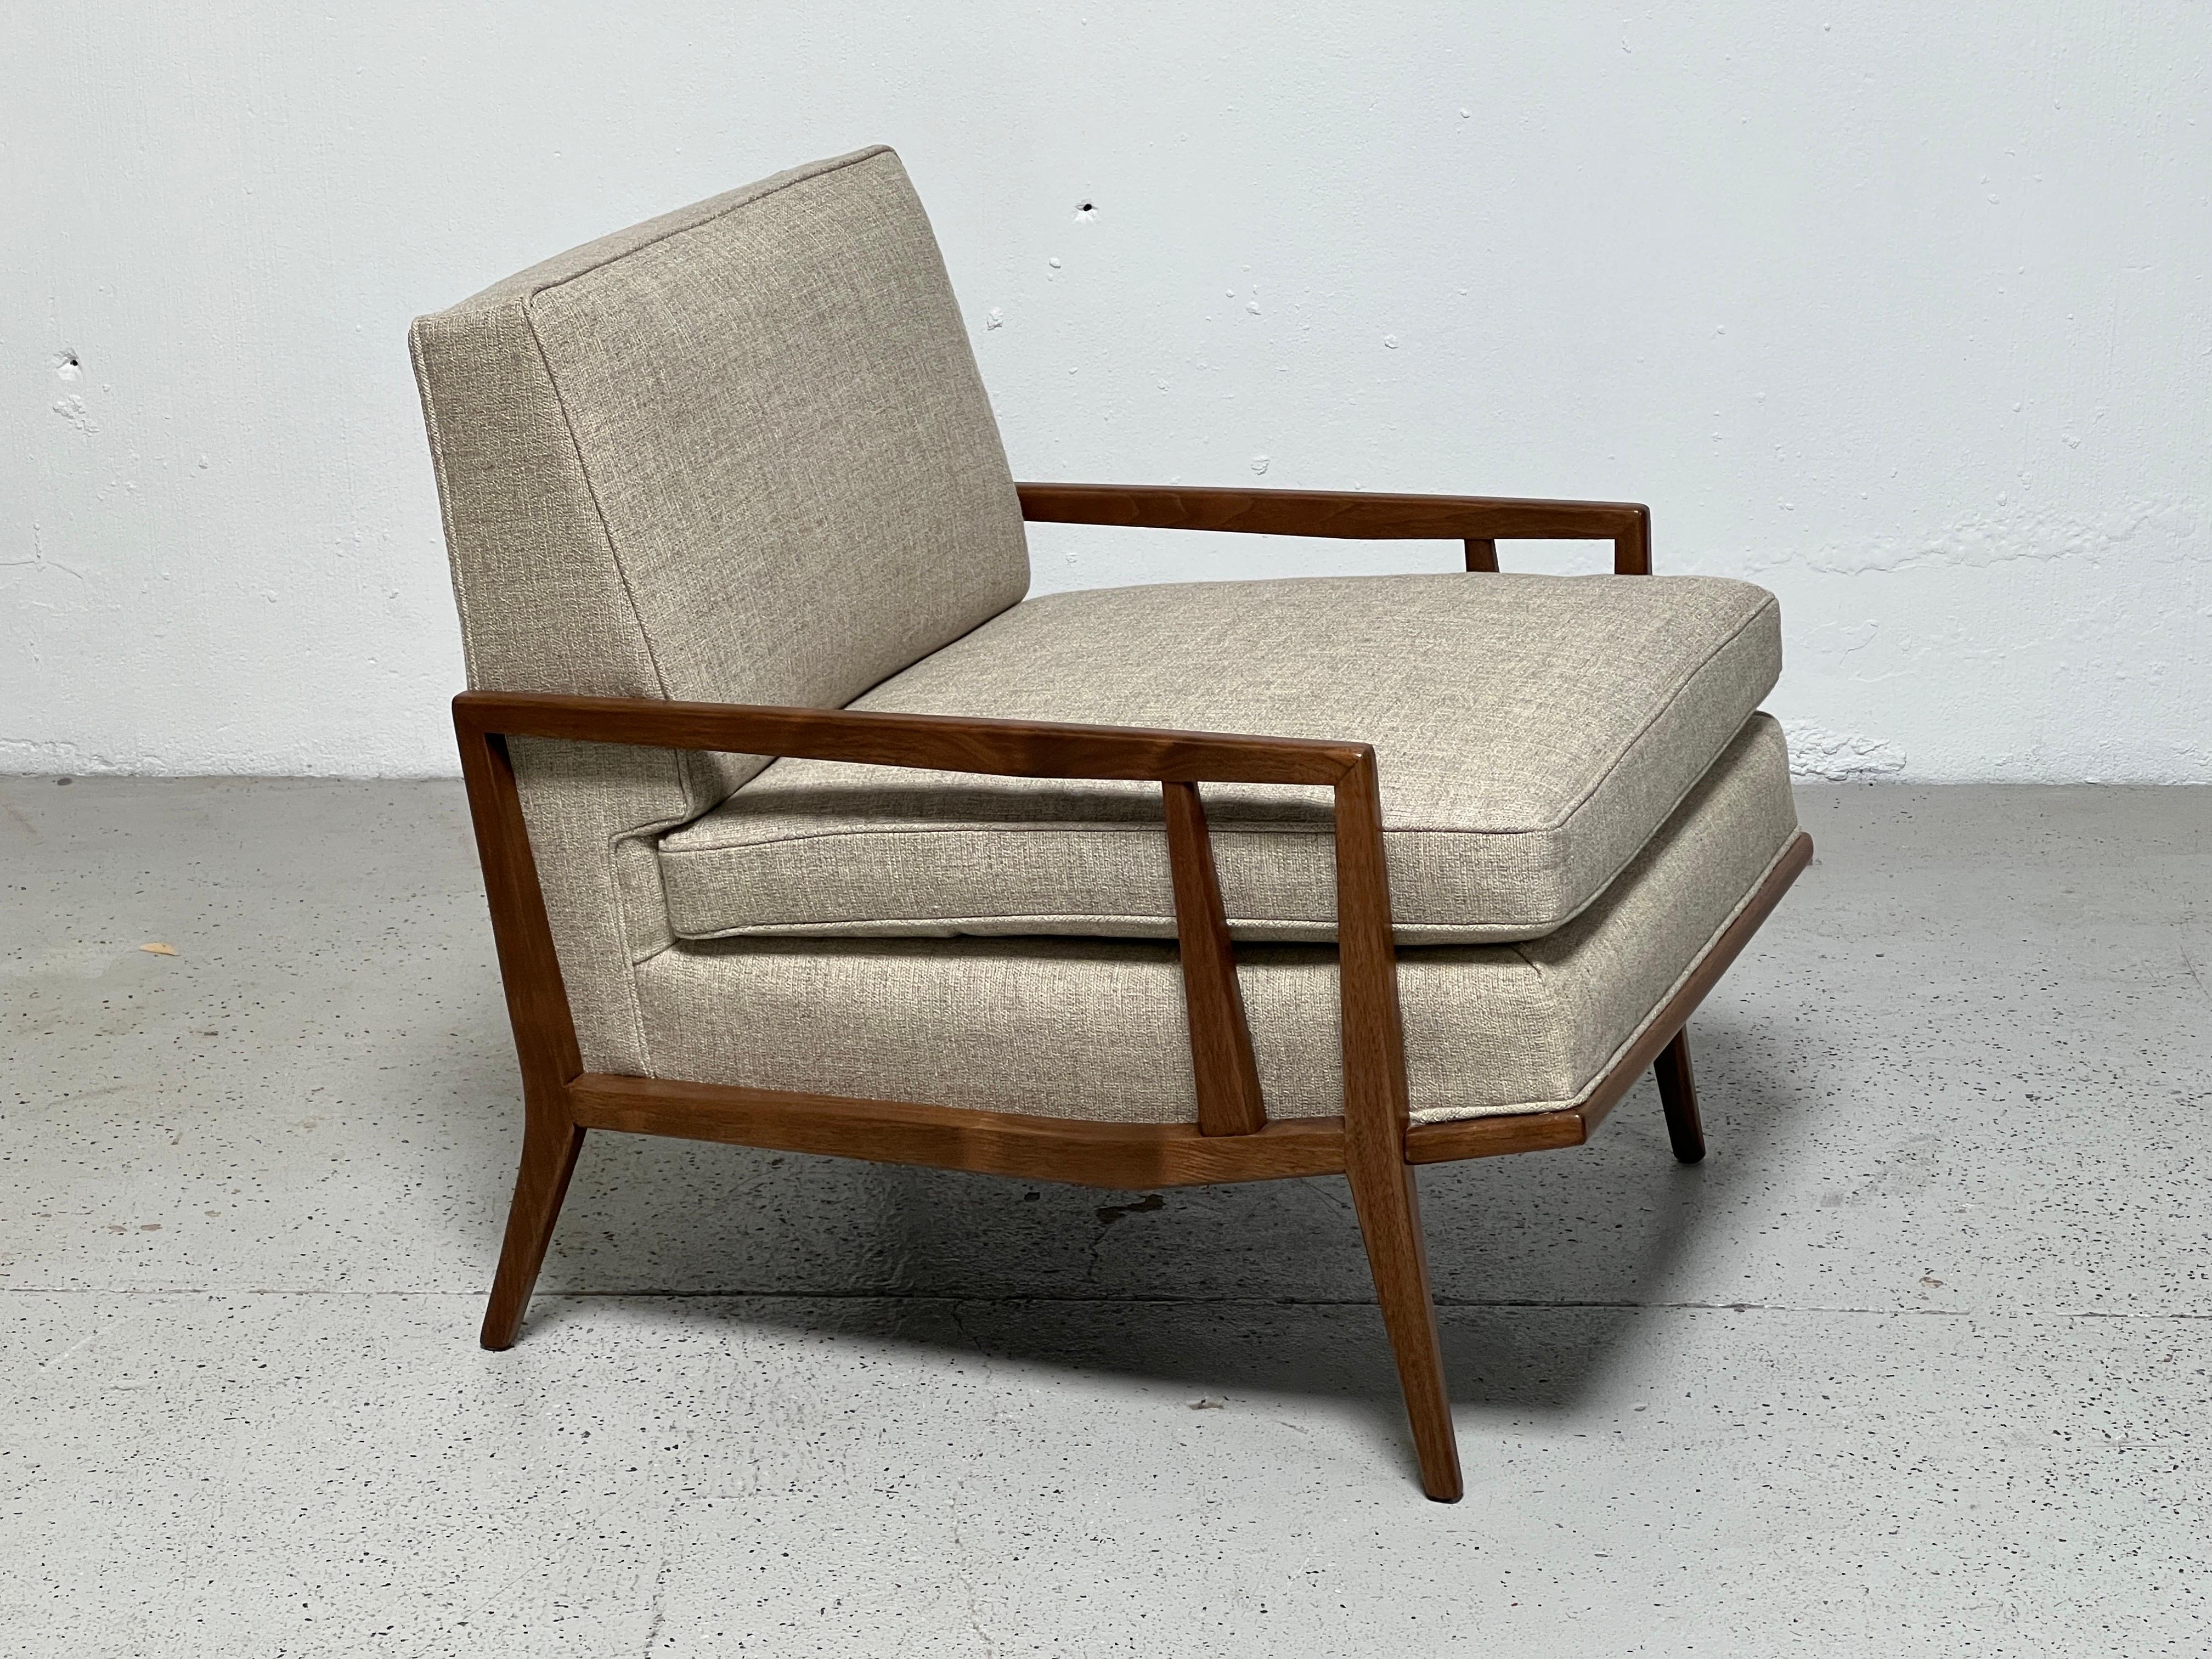 A rare lounge chair designed by Paul McCobb for Directional.